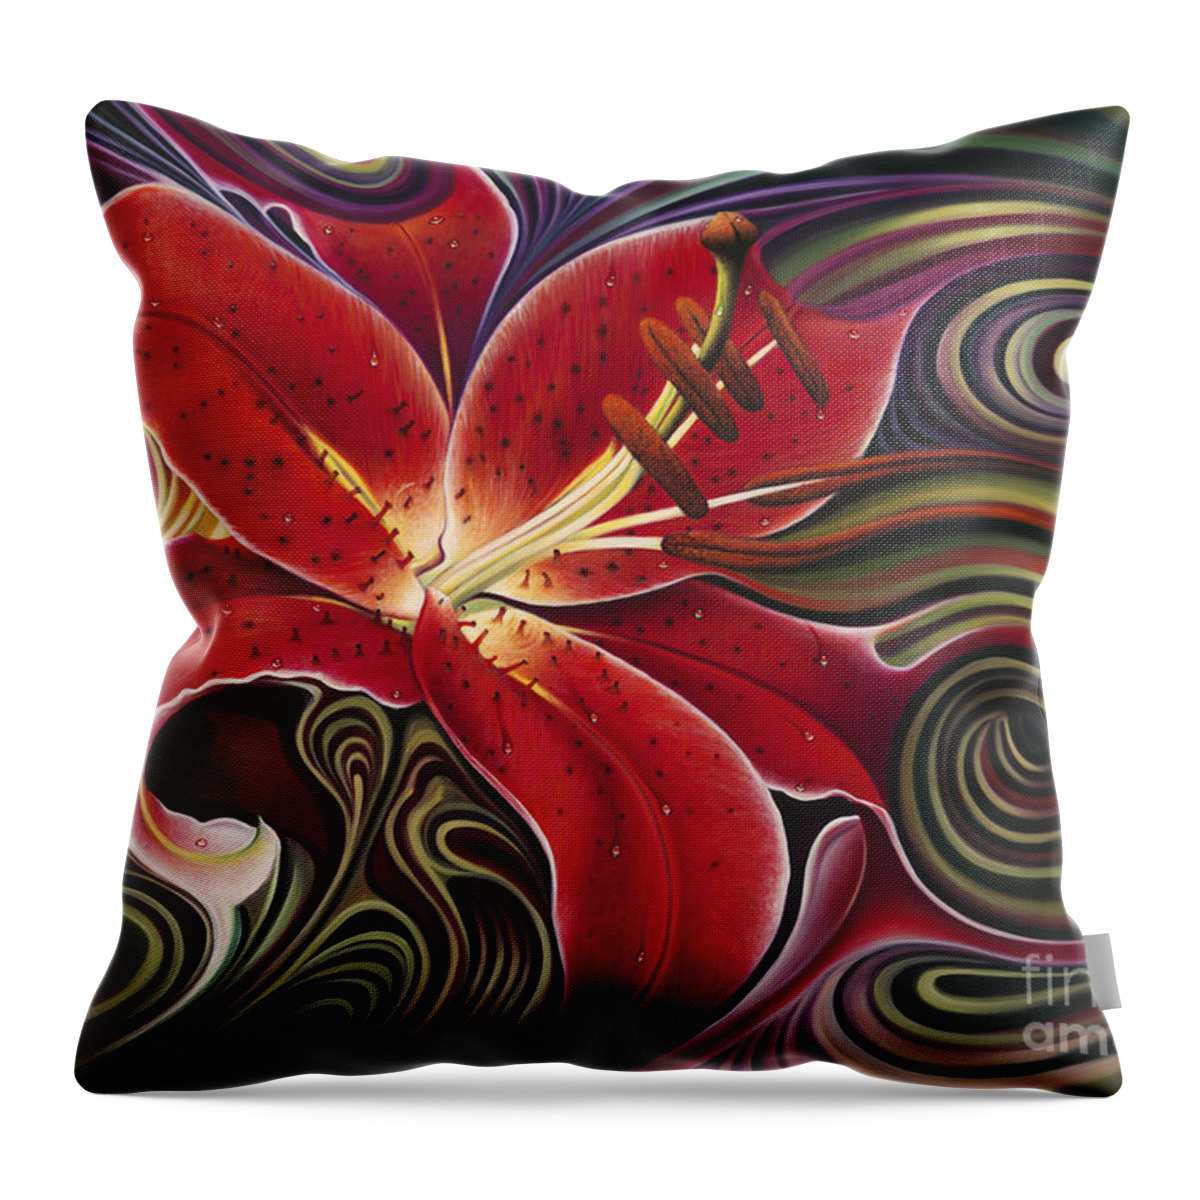 Lily Throw Pillow featuring the painting Dynamic Reds by Ricardo Chavez-Mendez